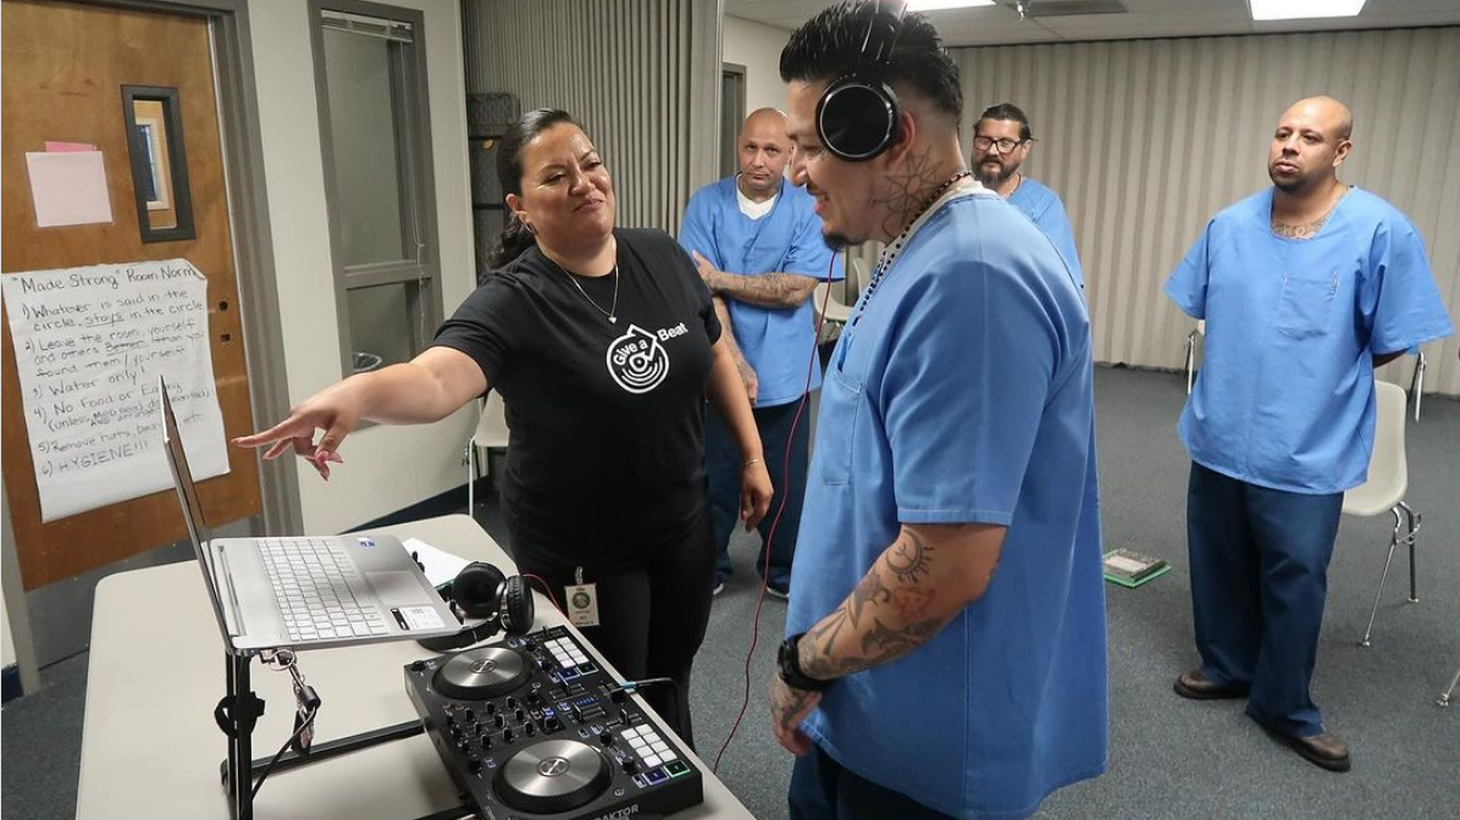 Angela “Spiñorita” Ramirez works with students at the California Rehabilitation Center. “Getting to know these guys and sharing music has been the biggest highlight of my year,” she says.